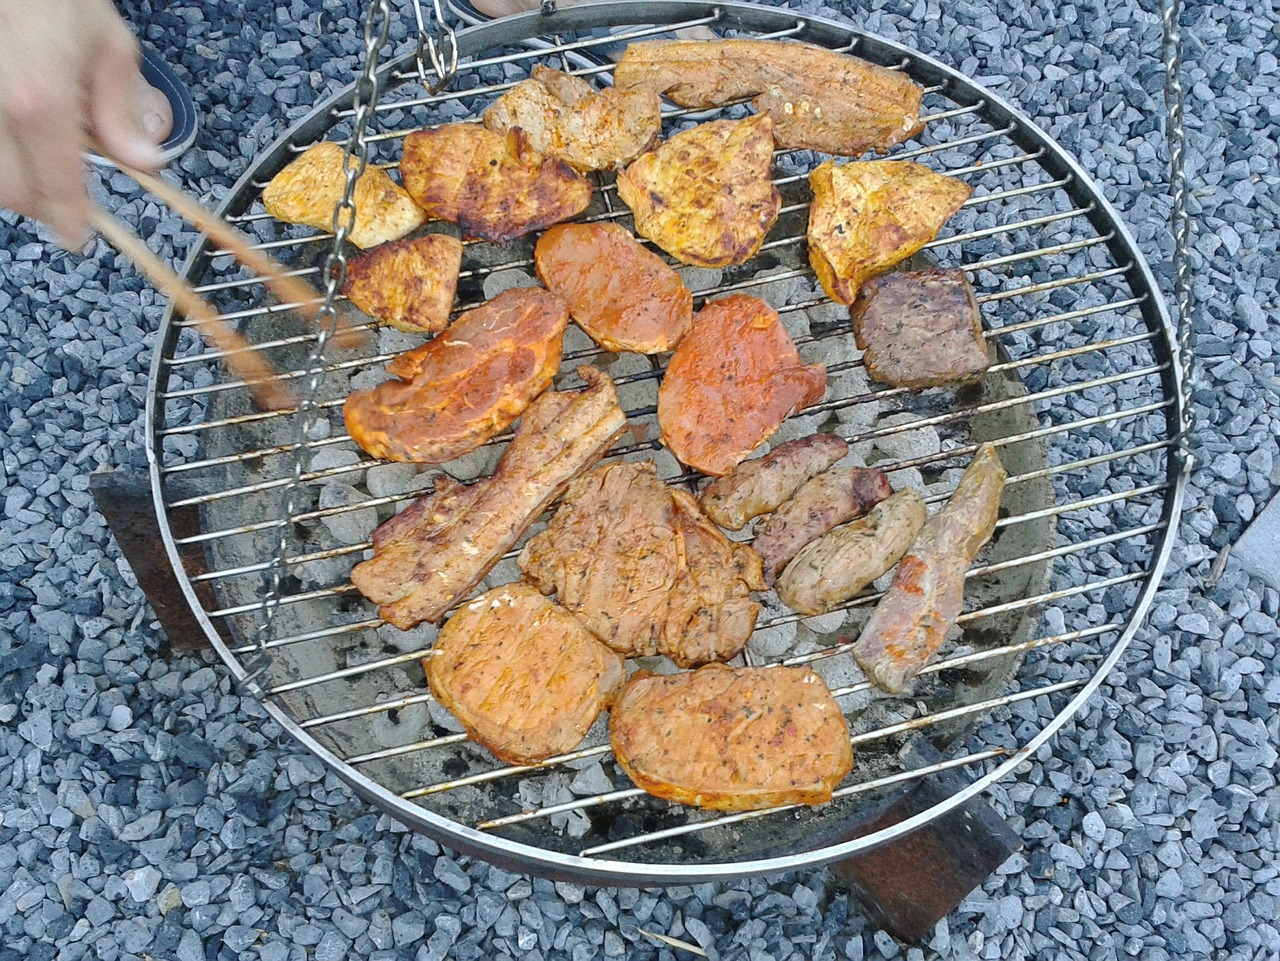 grilled meats barbecue grill free photo